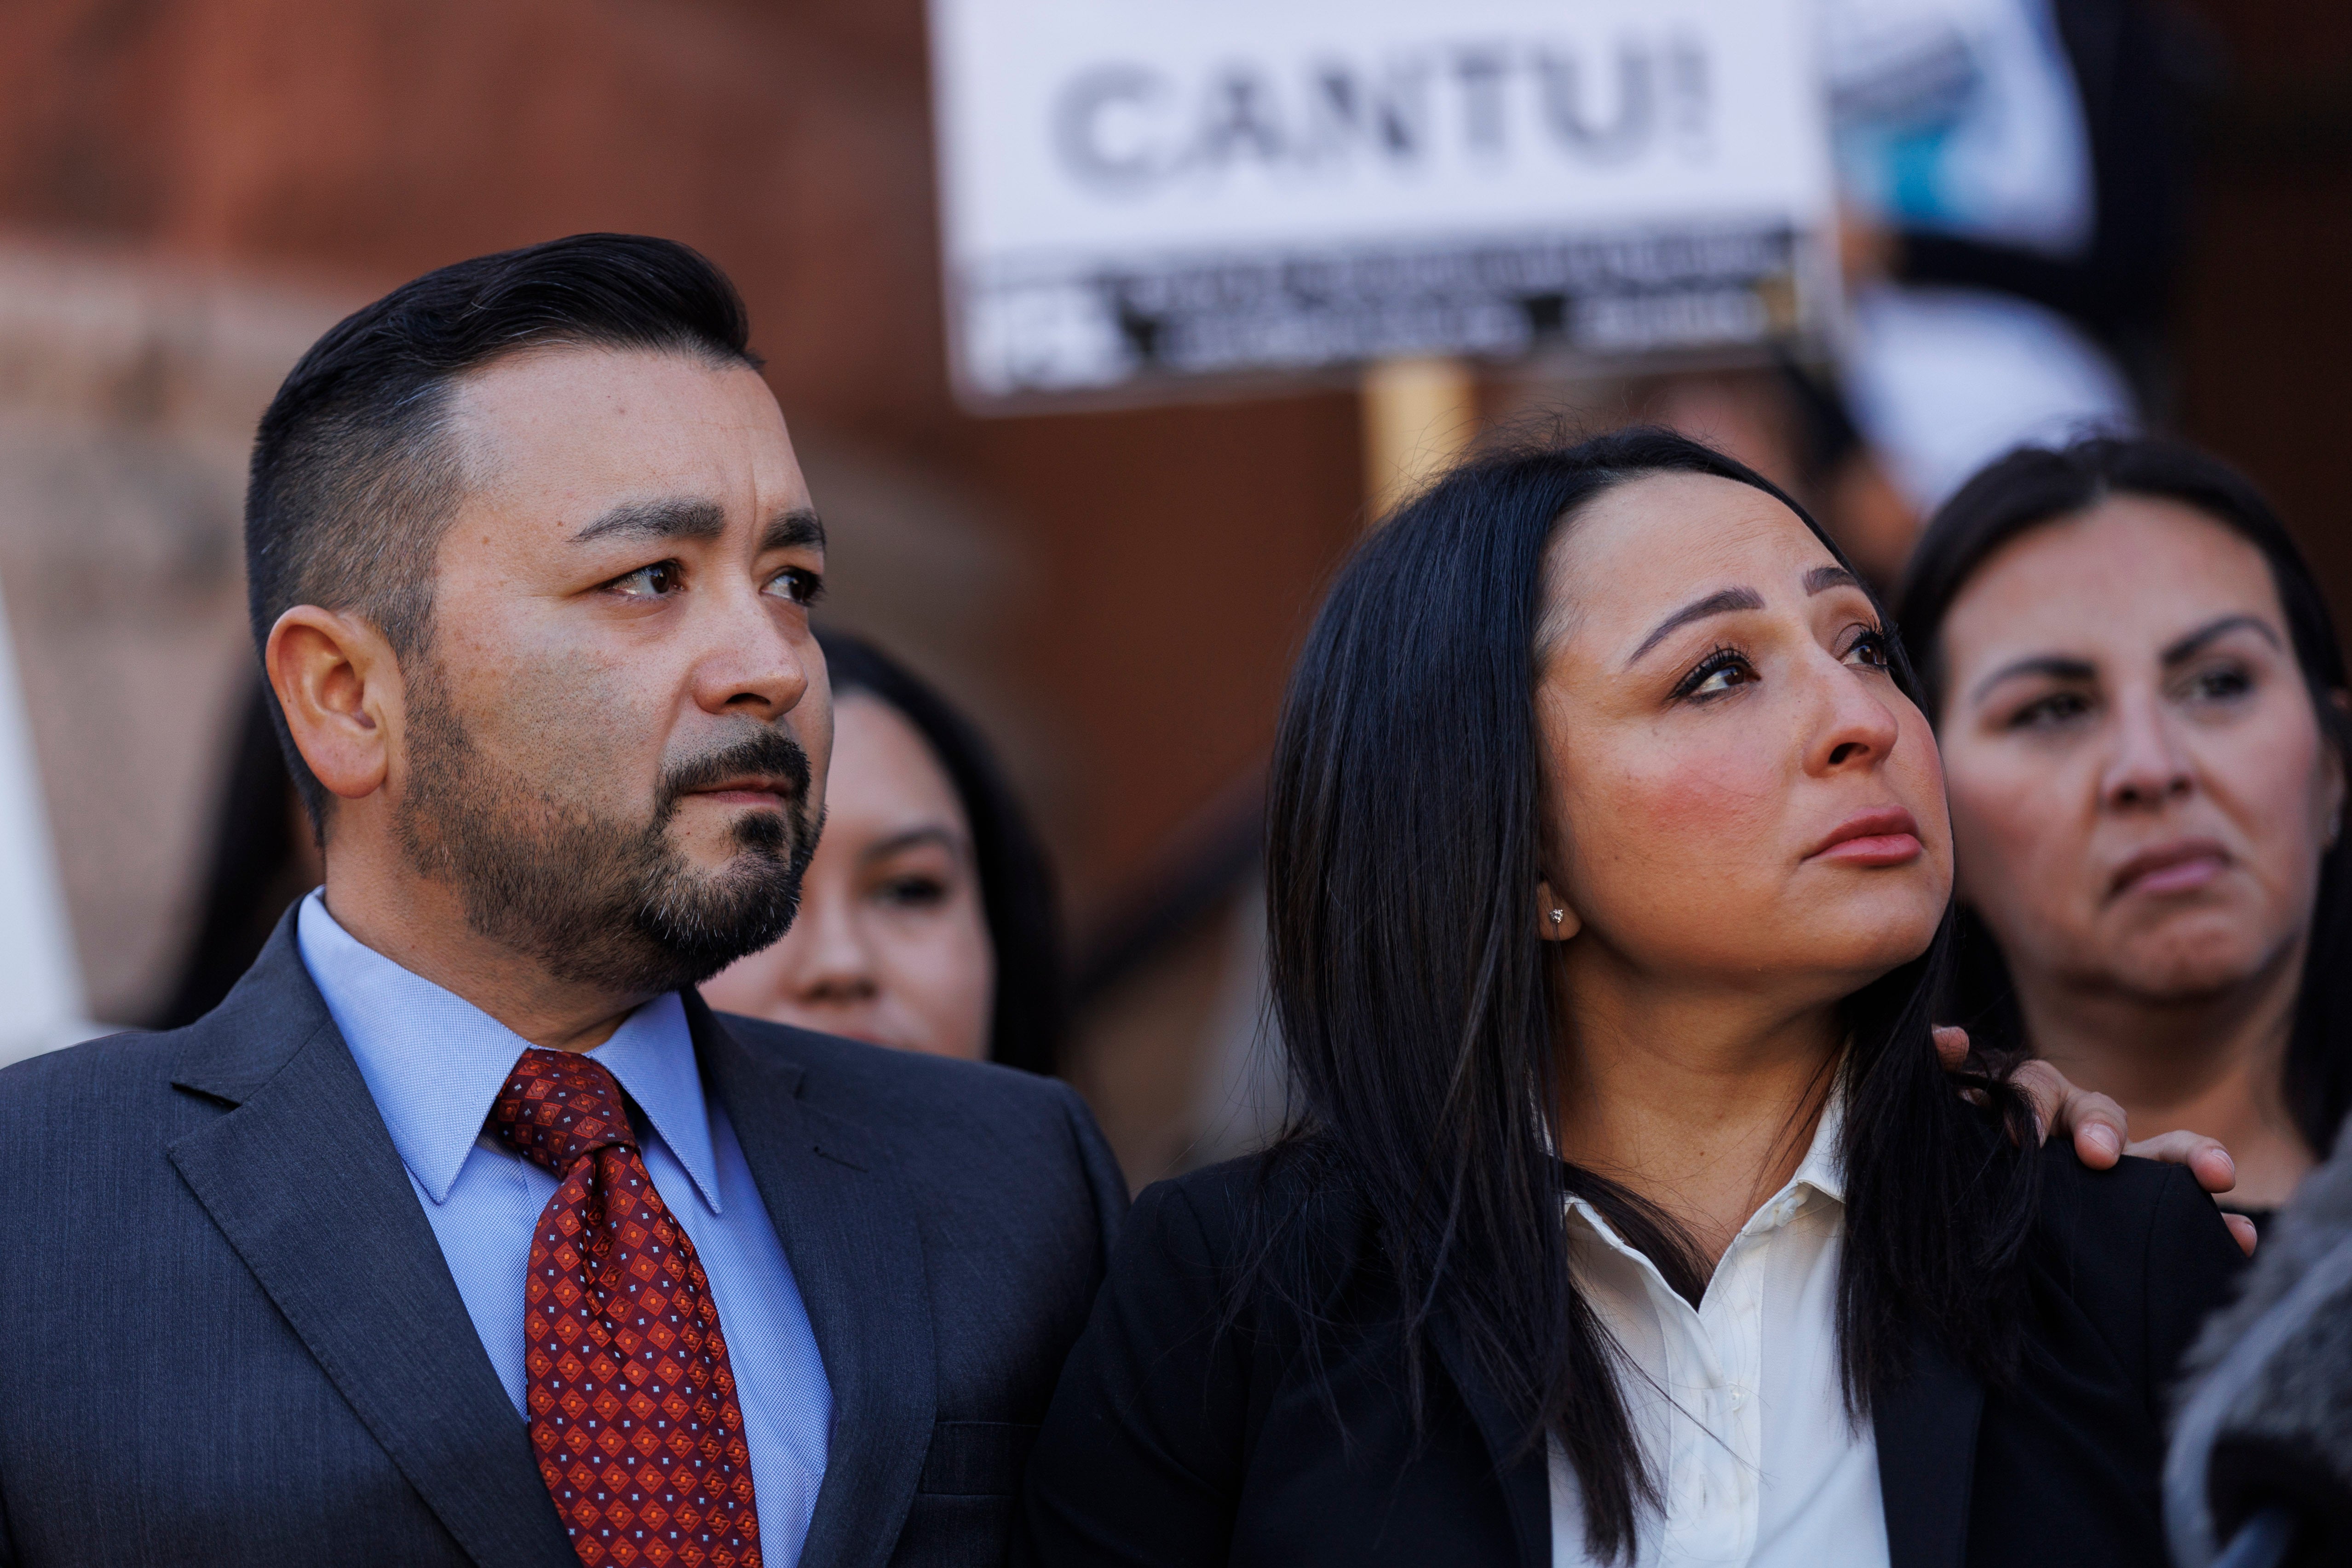 Eric Cantu Sr. and Victoria Casarez listen as Benjamin Crump, one of their attorneys, addresses the news media about their 17-year-old son Erik Cantu